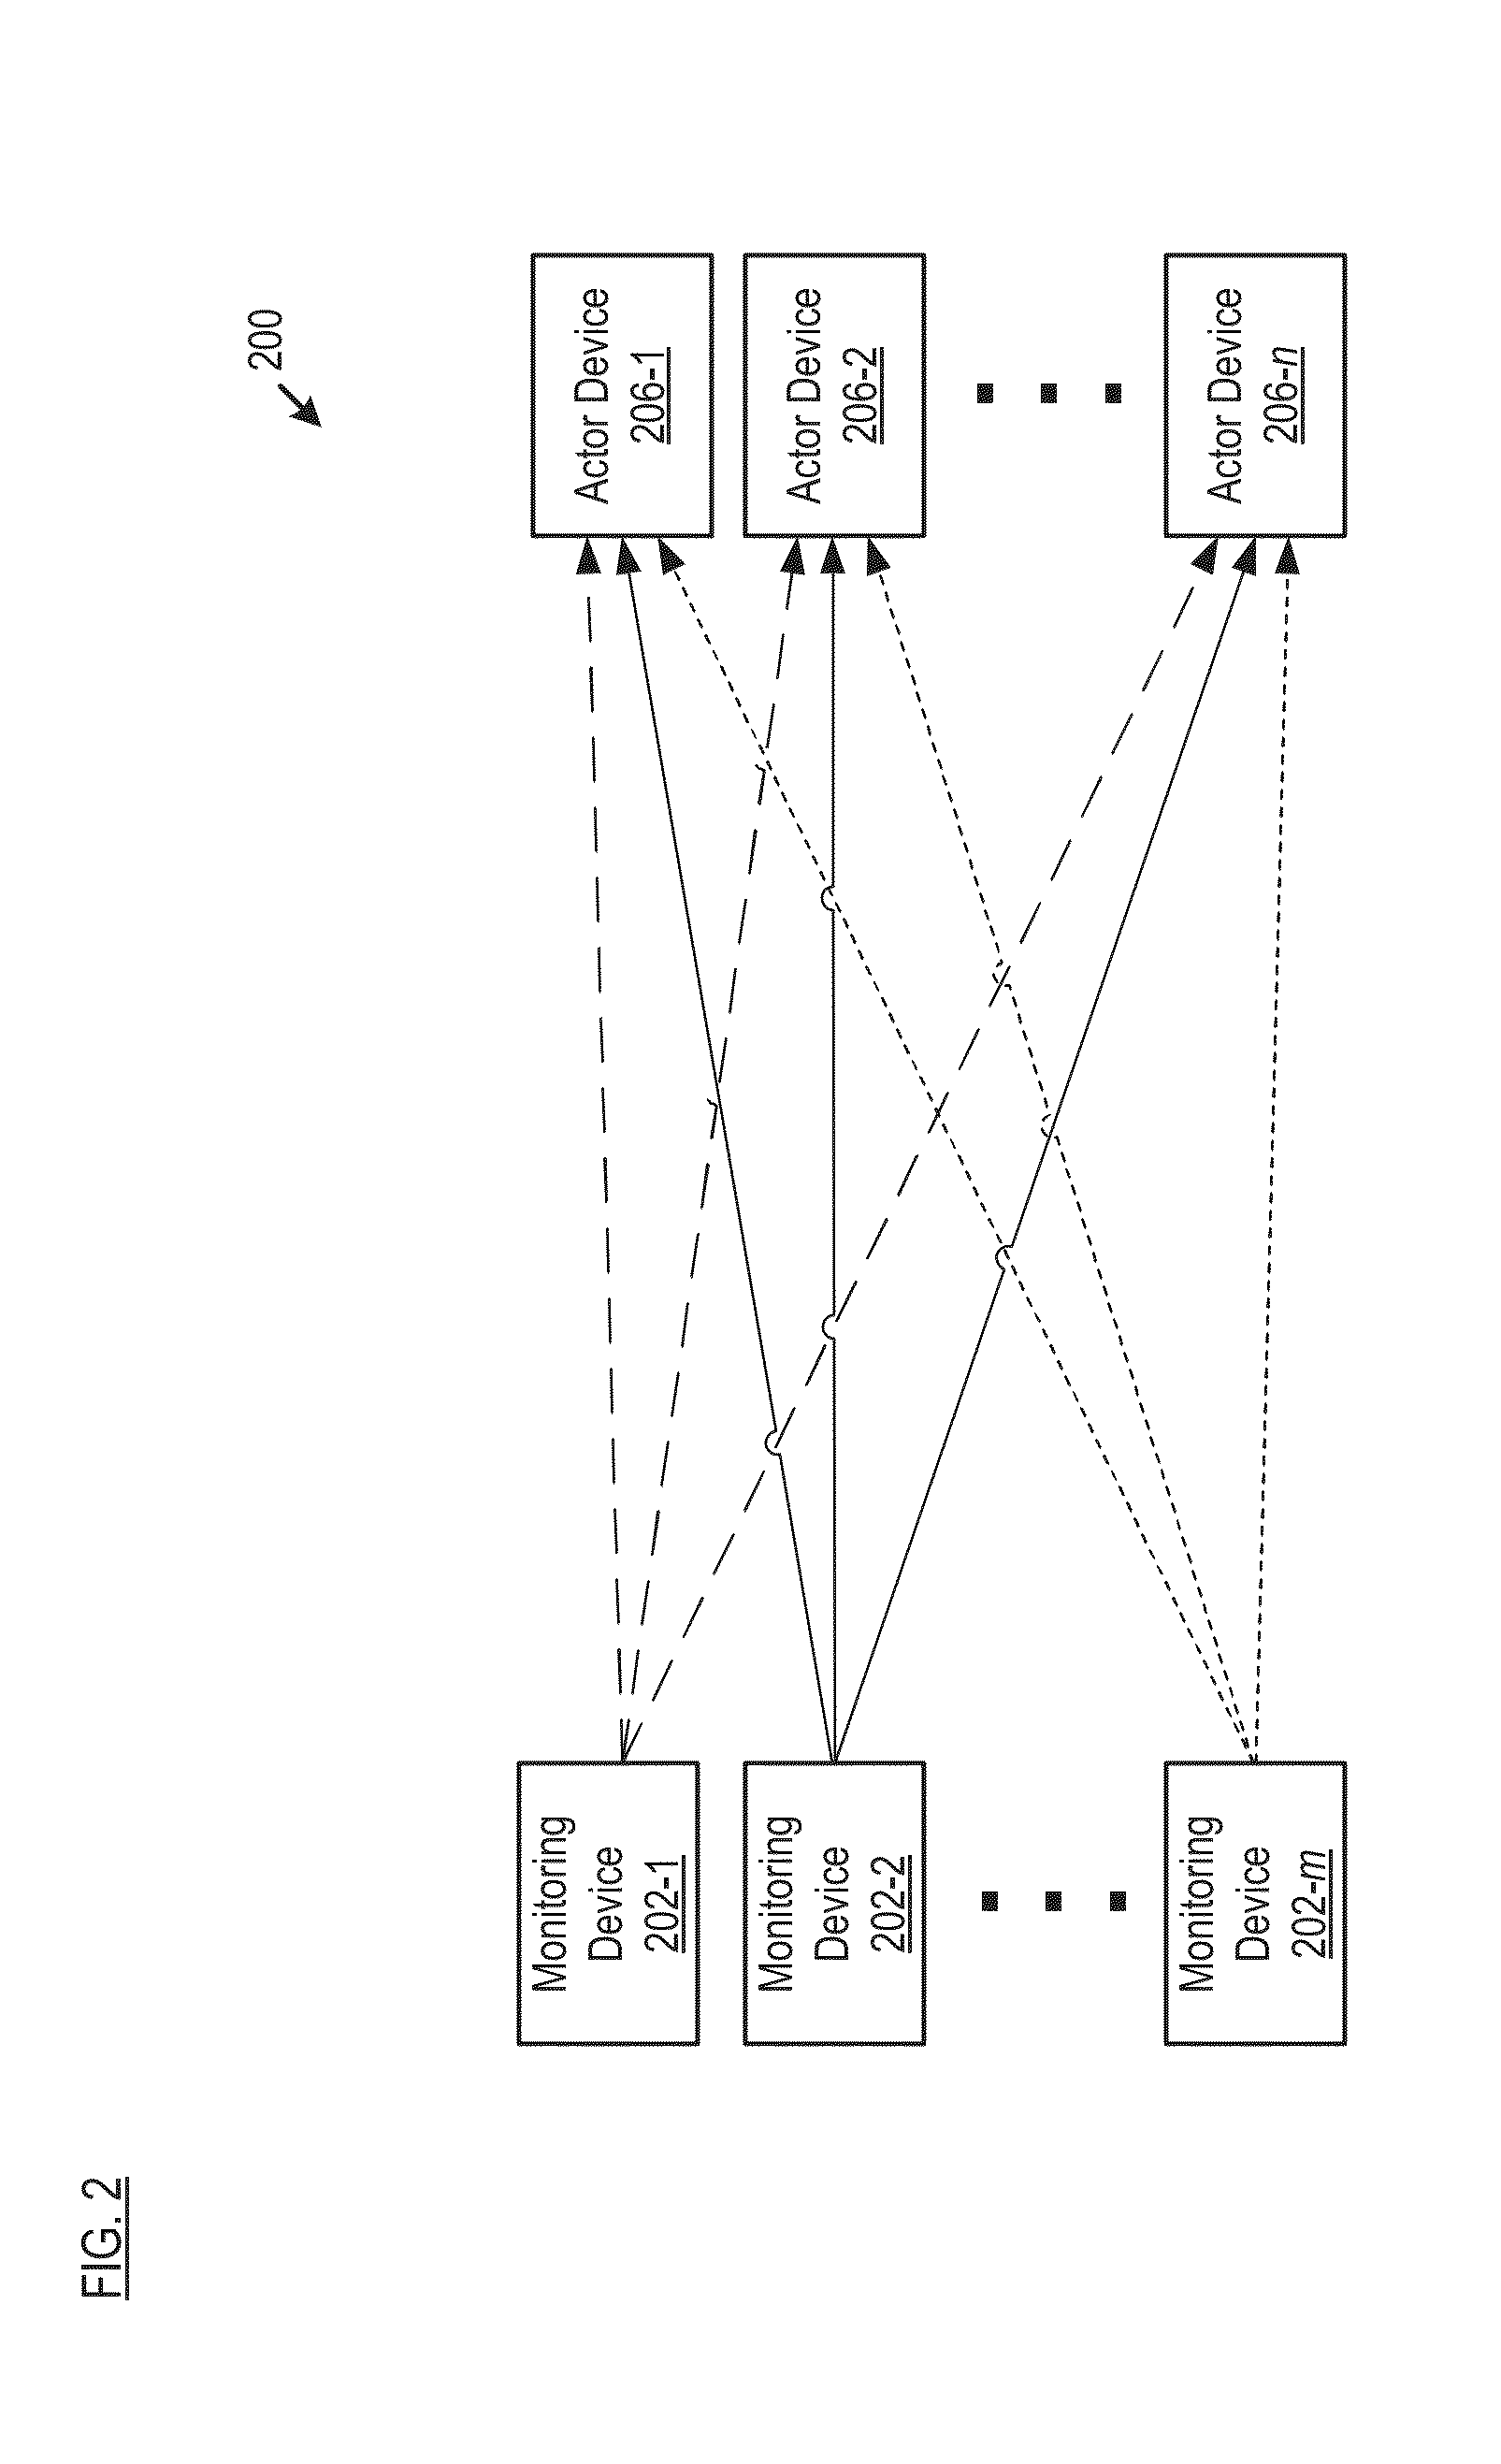 Automation System Comprising a Monitoring Device and Methods Therefor